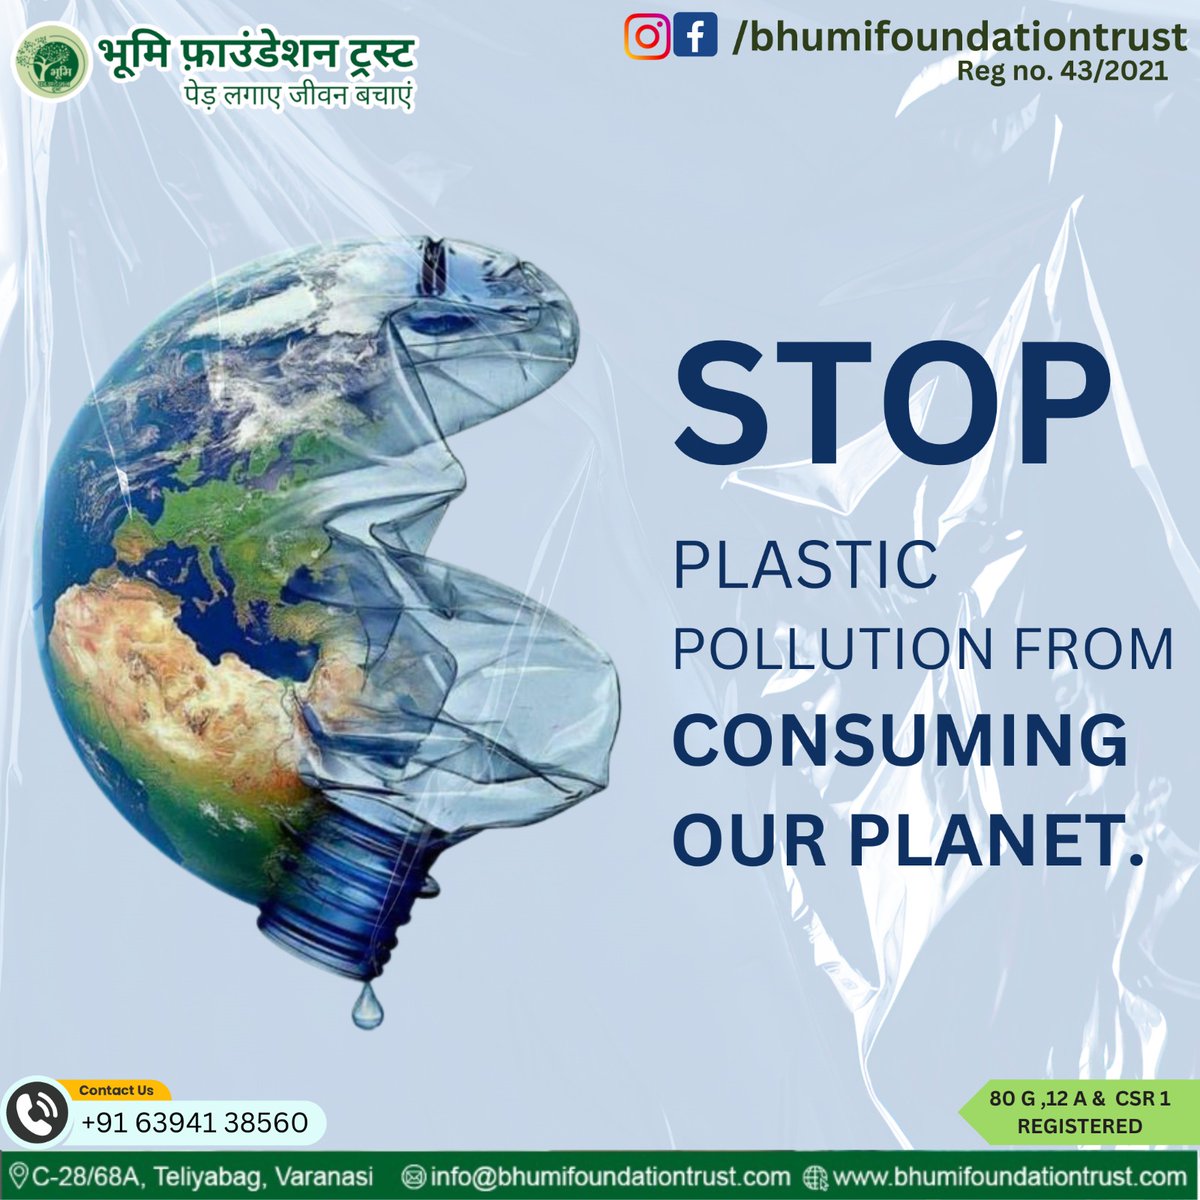 Let's break free from the grip of plastic pollution before it devours our planet.

#NatureConservation #BhumiFoundationTrust #ProtectOurPlanet #plasticfree #planttrees #saveforest #uttarprdesh #betterlife #naturelover #BhumiFoundationTrust #plantationhomes #gogreen…